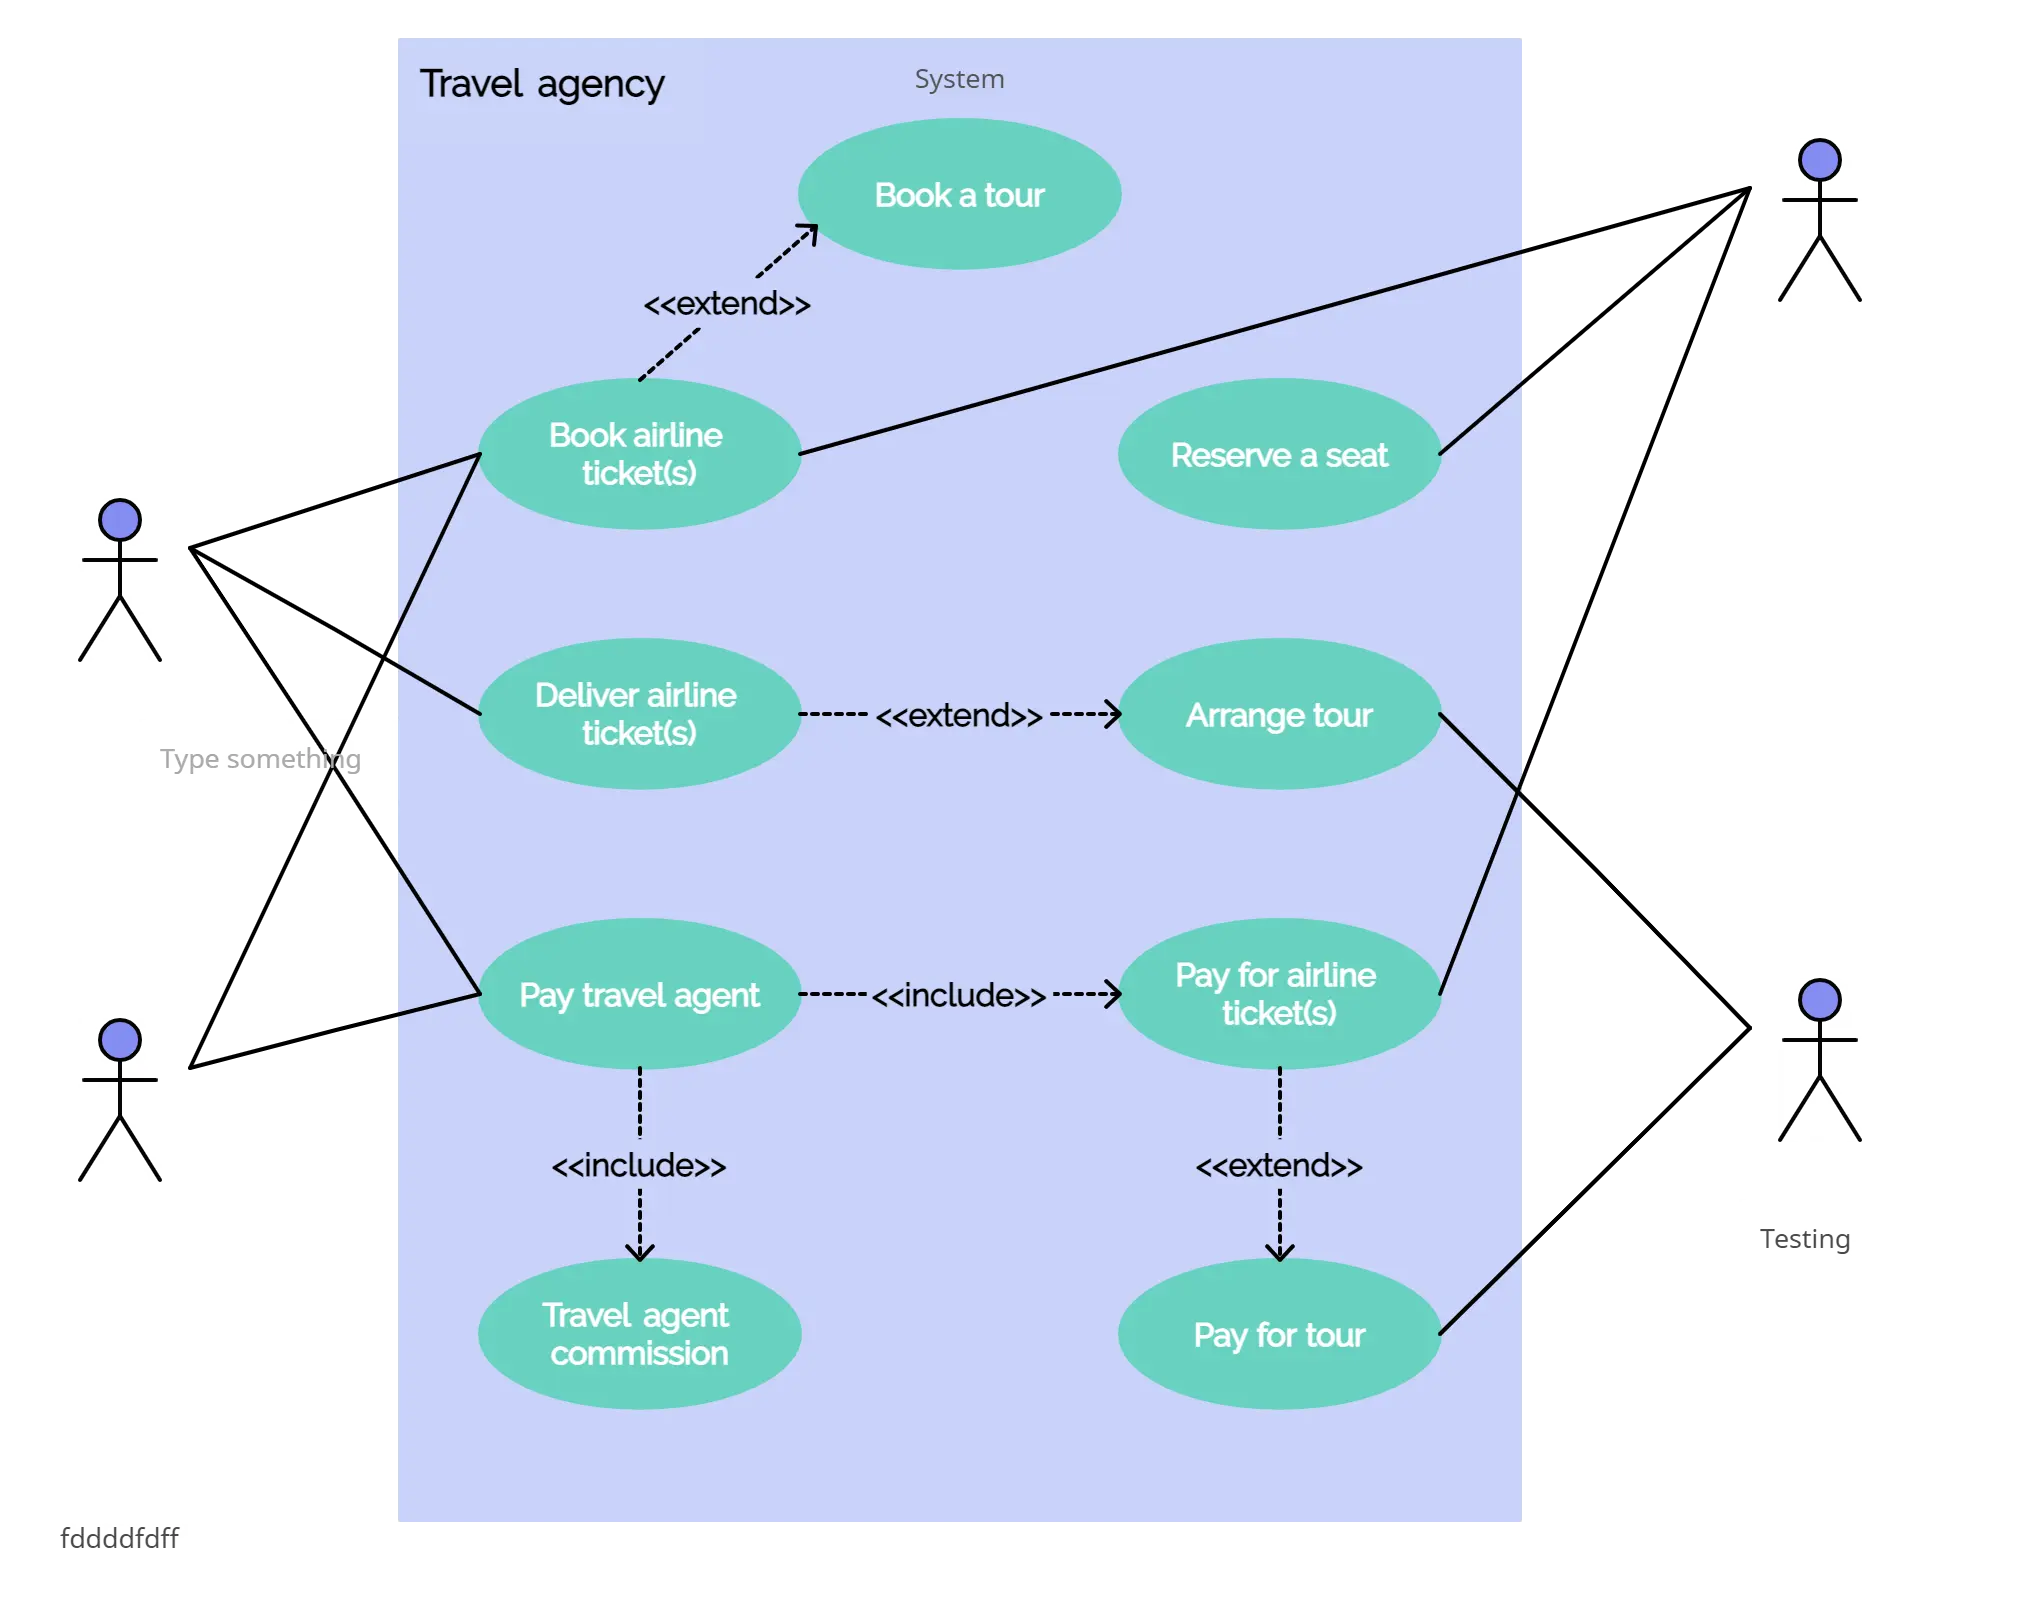 Use Case Diagram for Travel Agency - Use Case Diagram Tutorial